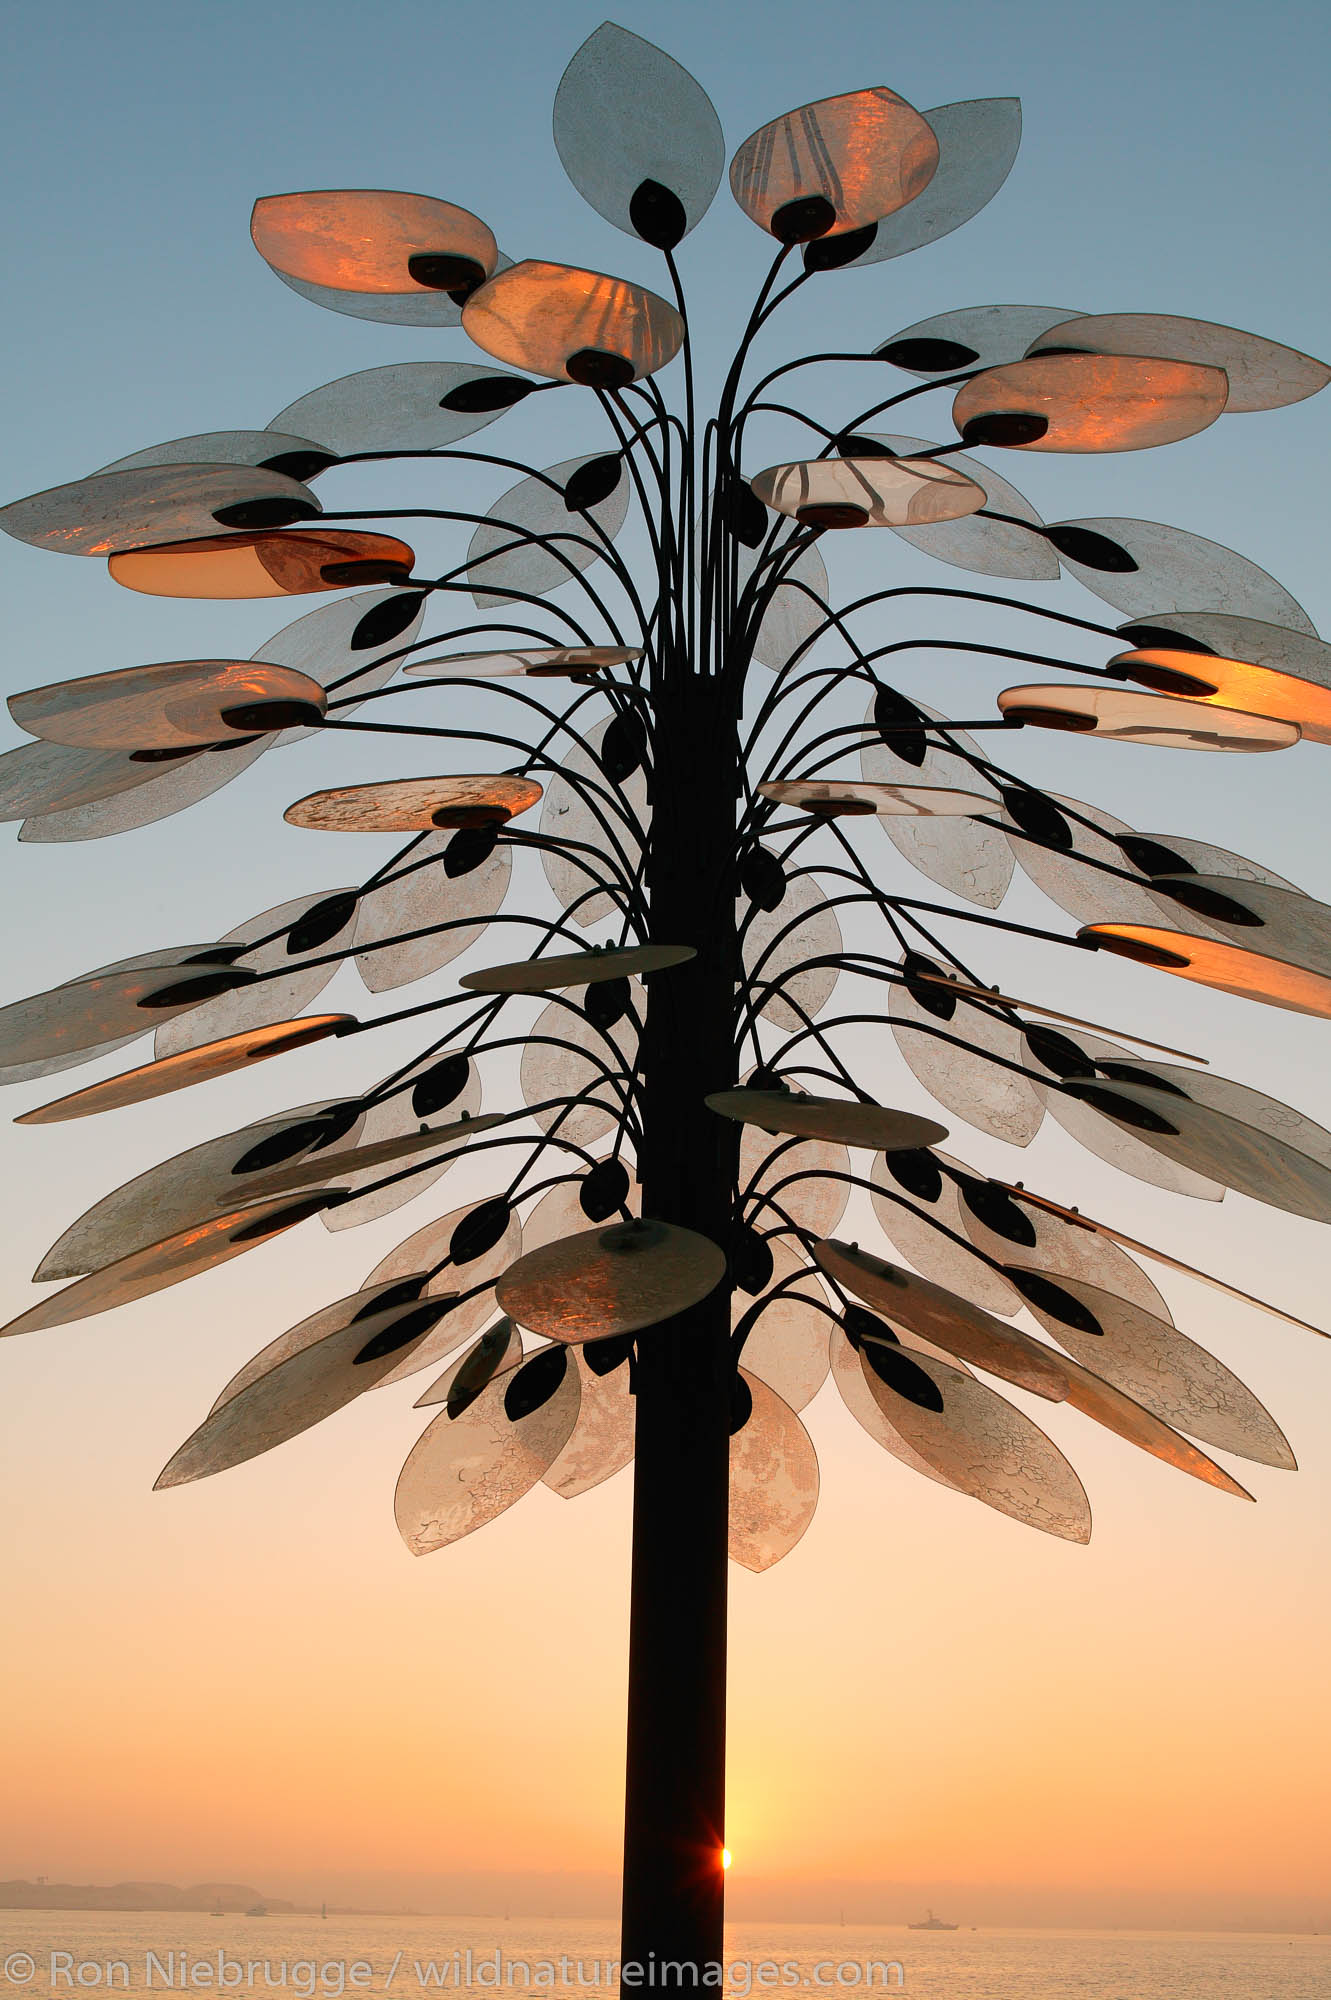 This tree sculpture seen at sunset along the downtown water front embarcadero is part of an urban tree art program, San Diego...